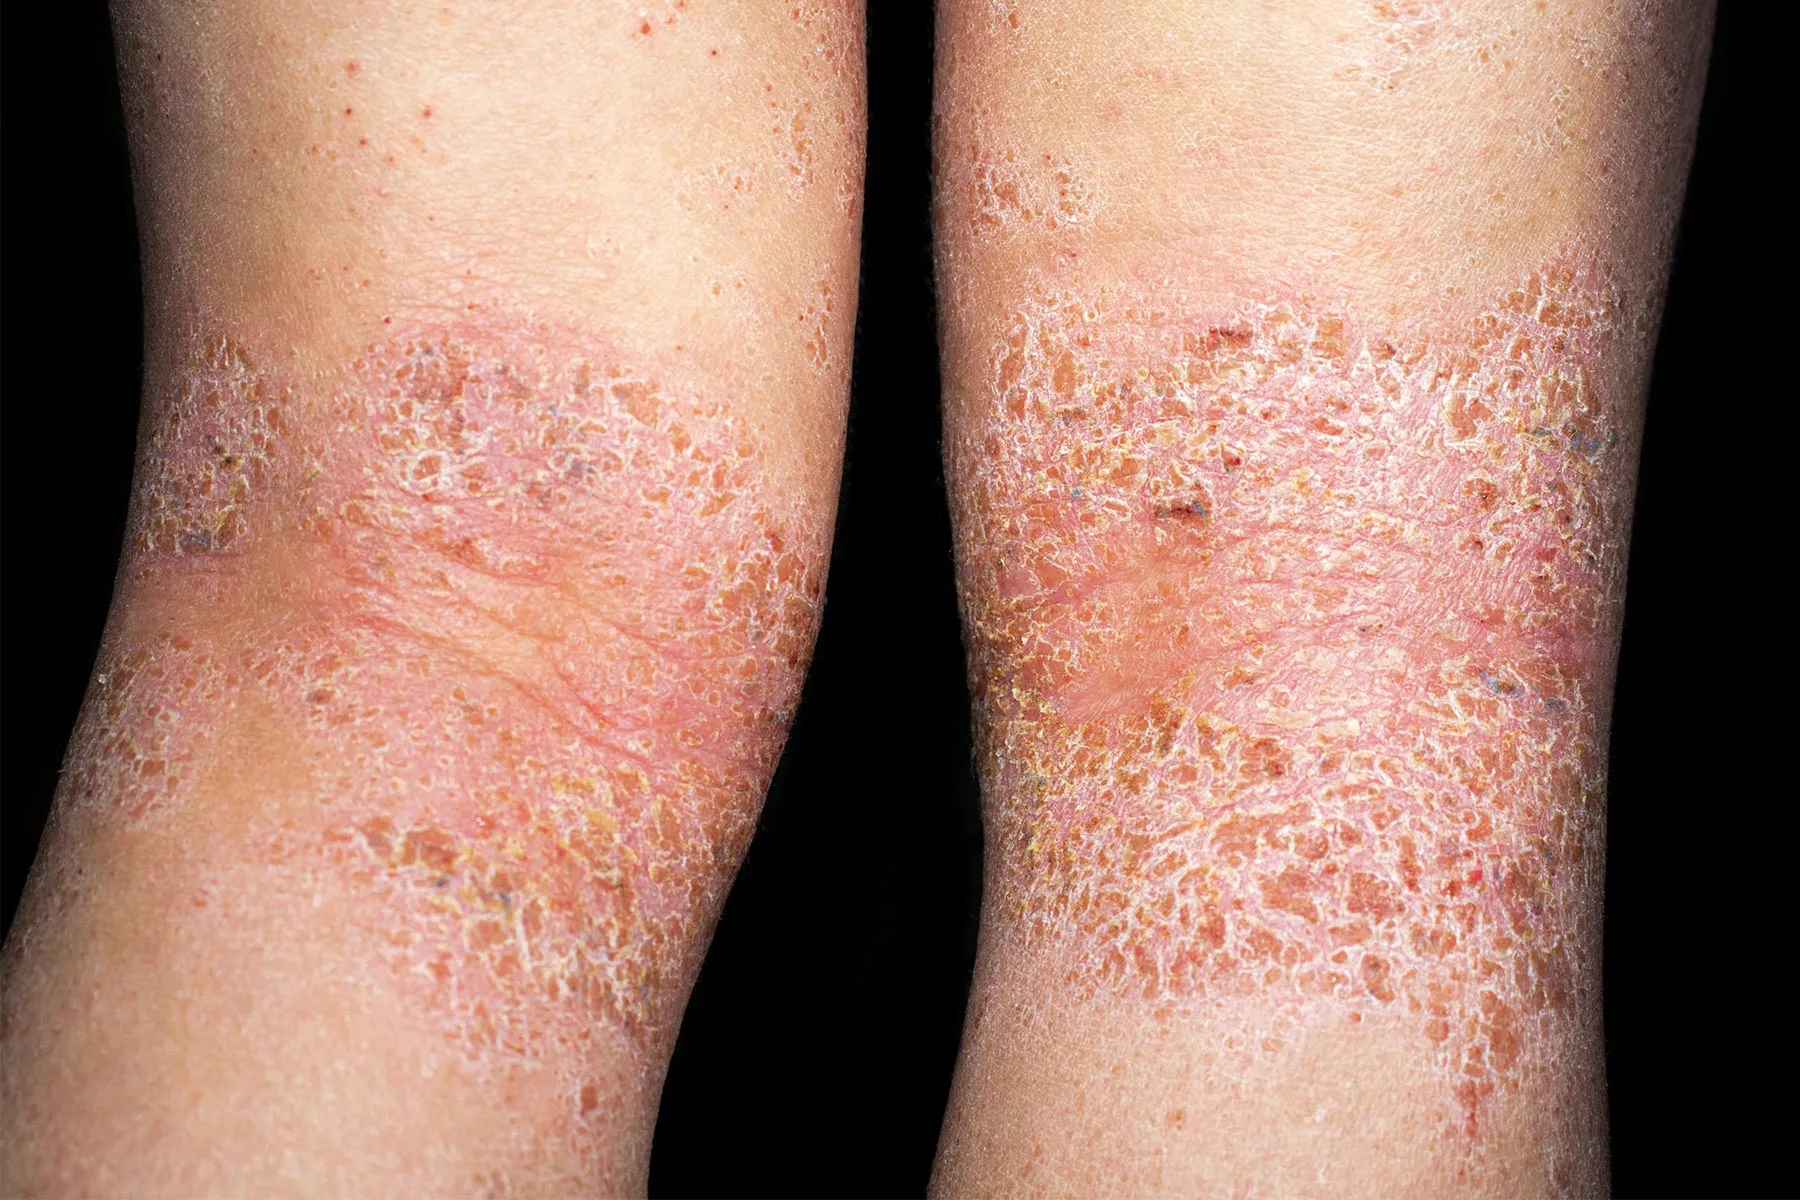 Is It Dry Skin or Atopic Dermatitis?